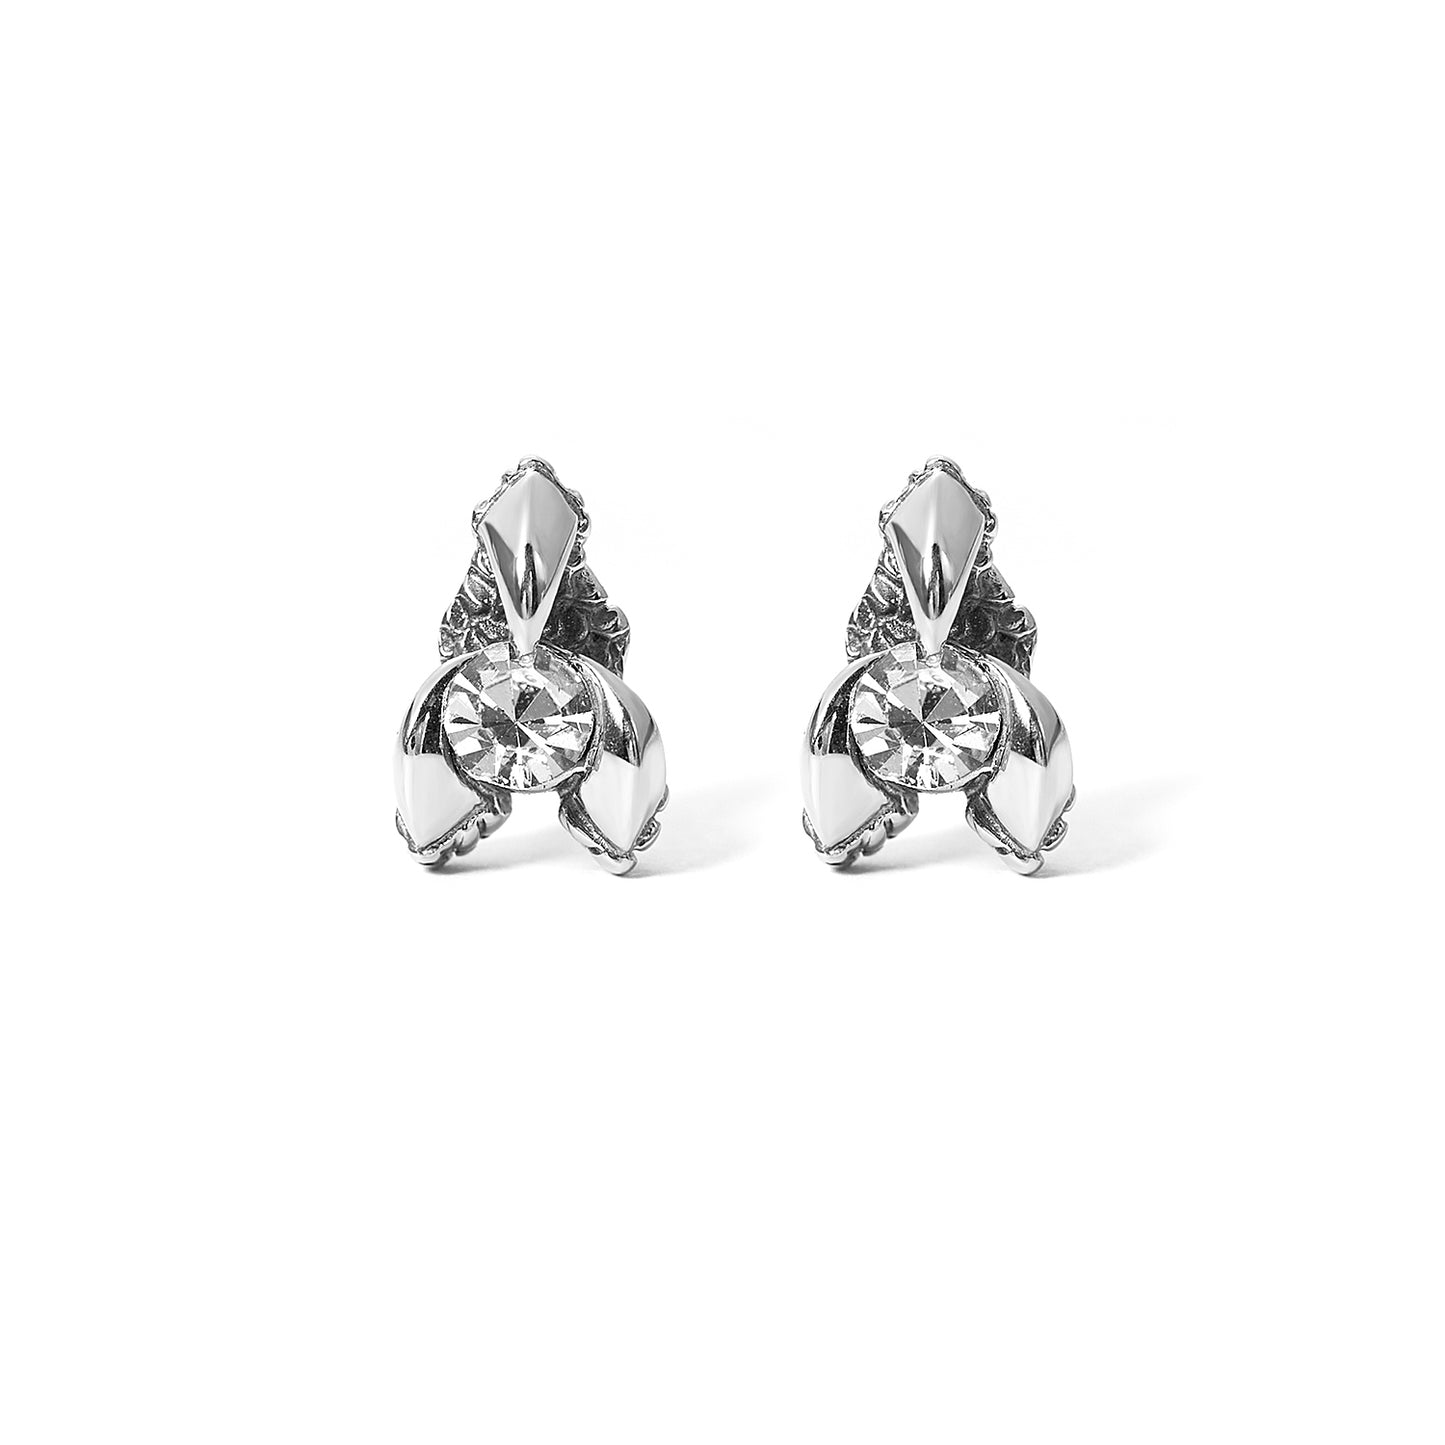 AntiqueThai Silver Style Windmill with Cubic Zirconia Stainless Steel Earring Stud for Men and Women